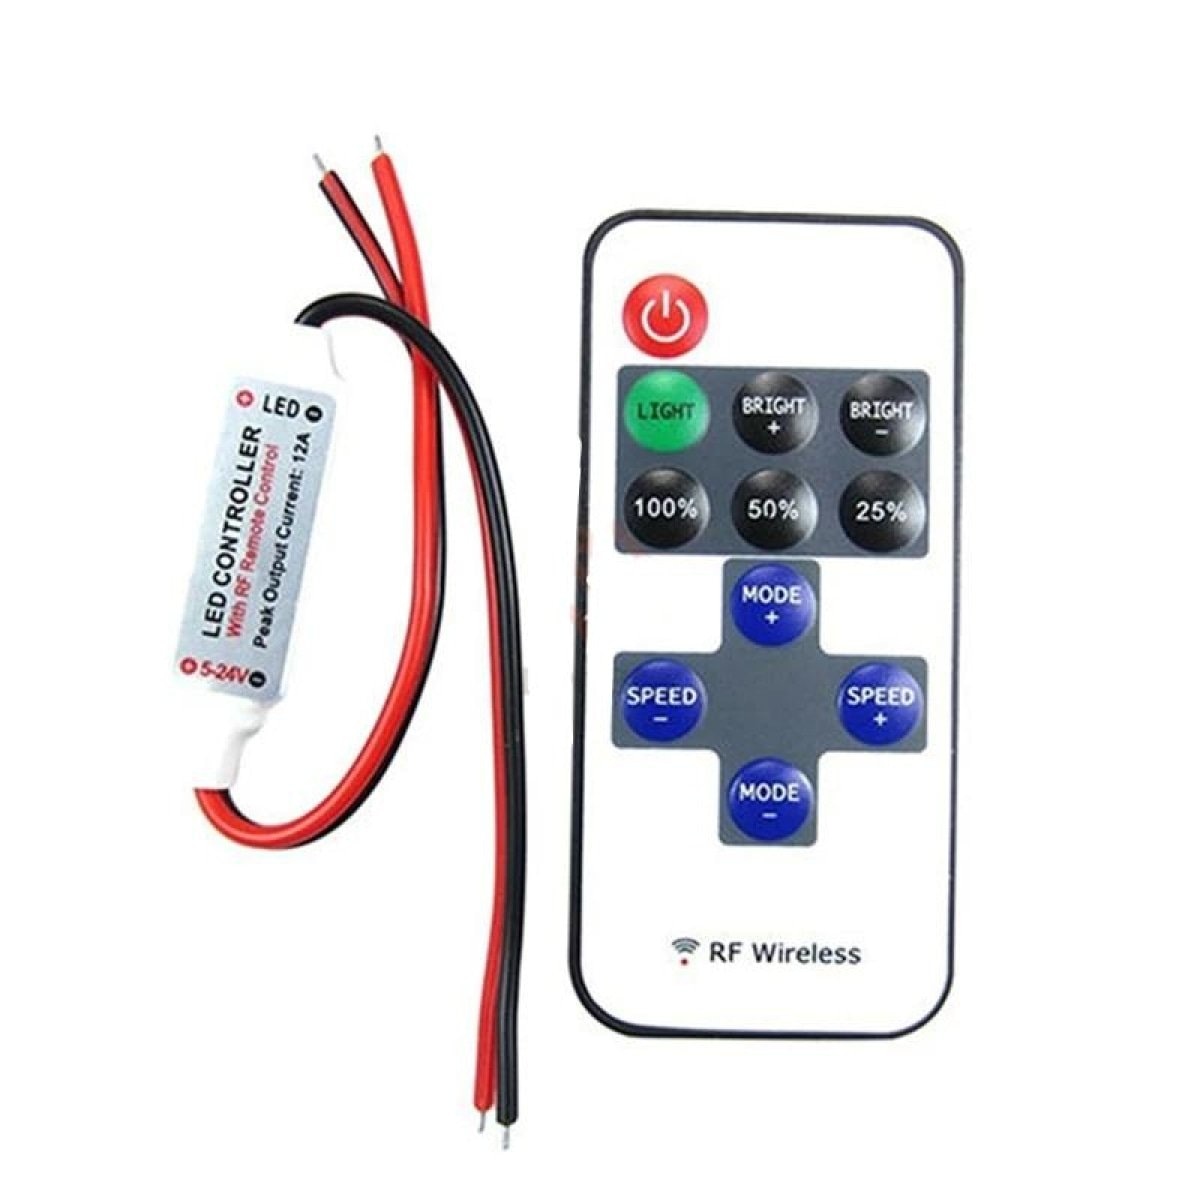 Affordable Dimmer Remote Control for Low Voltage LED Lights - Battery Powered